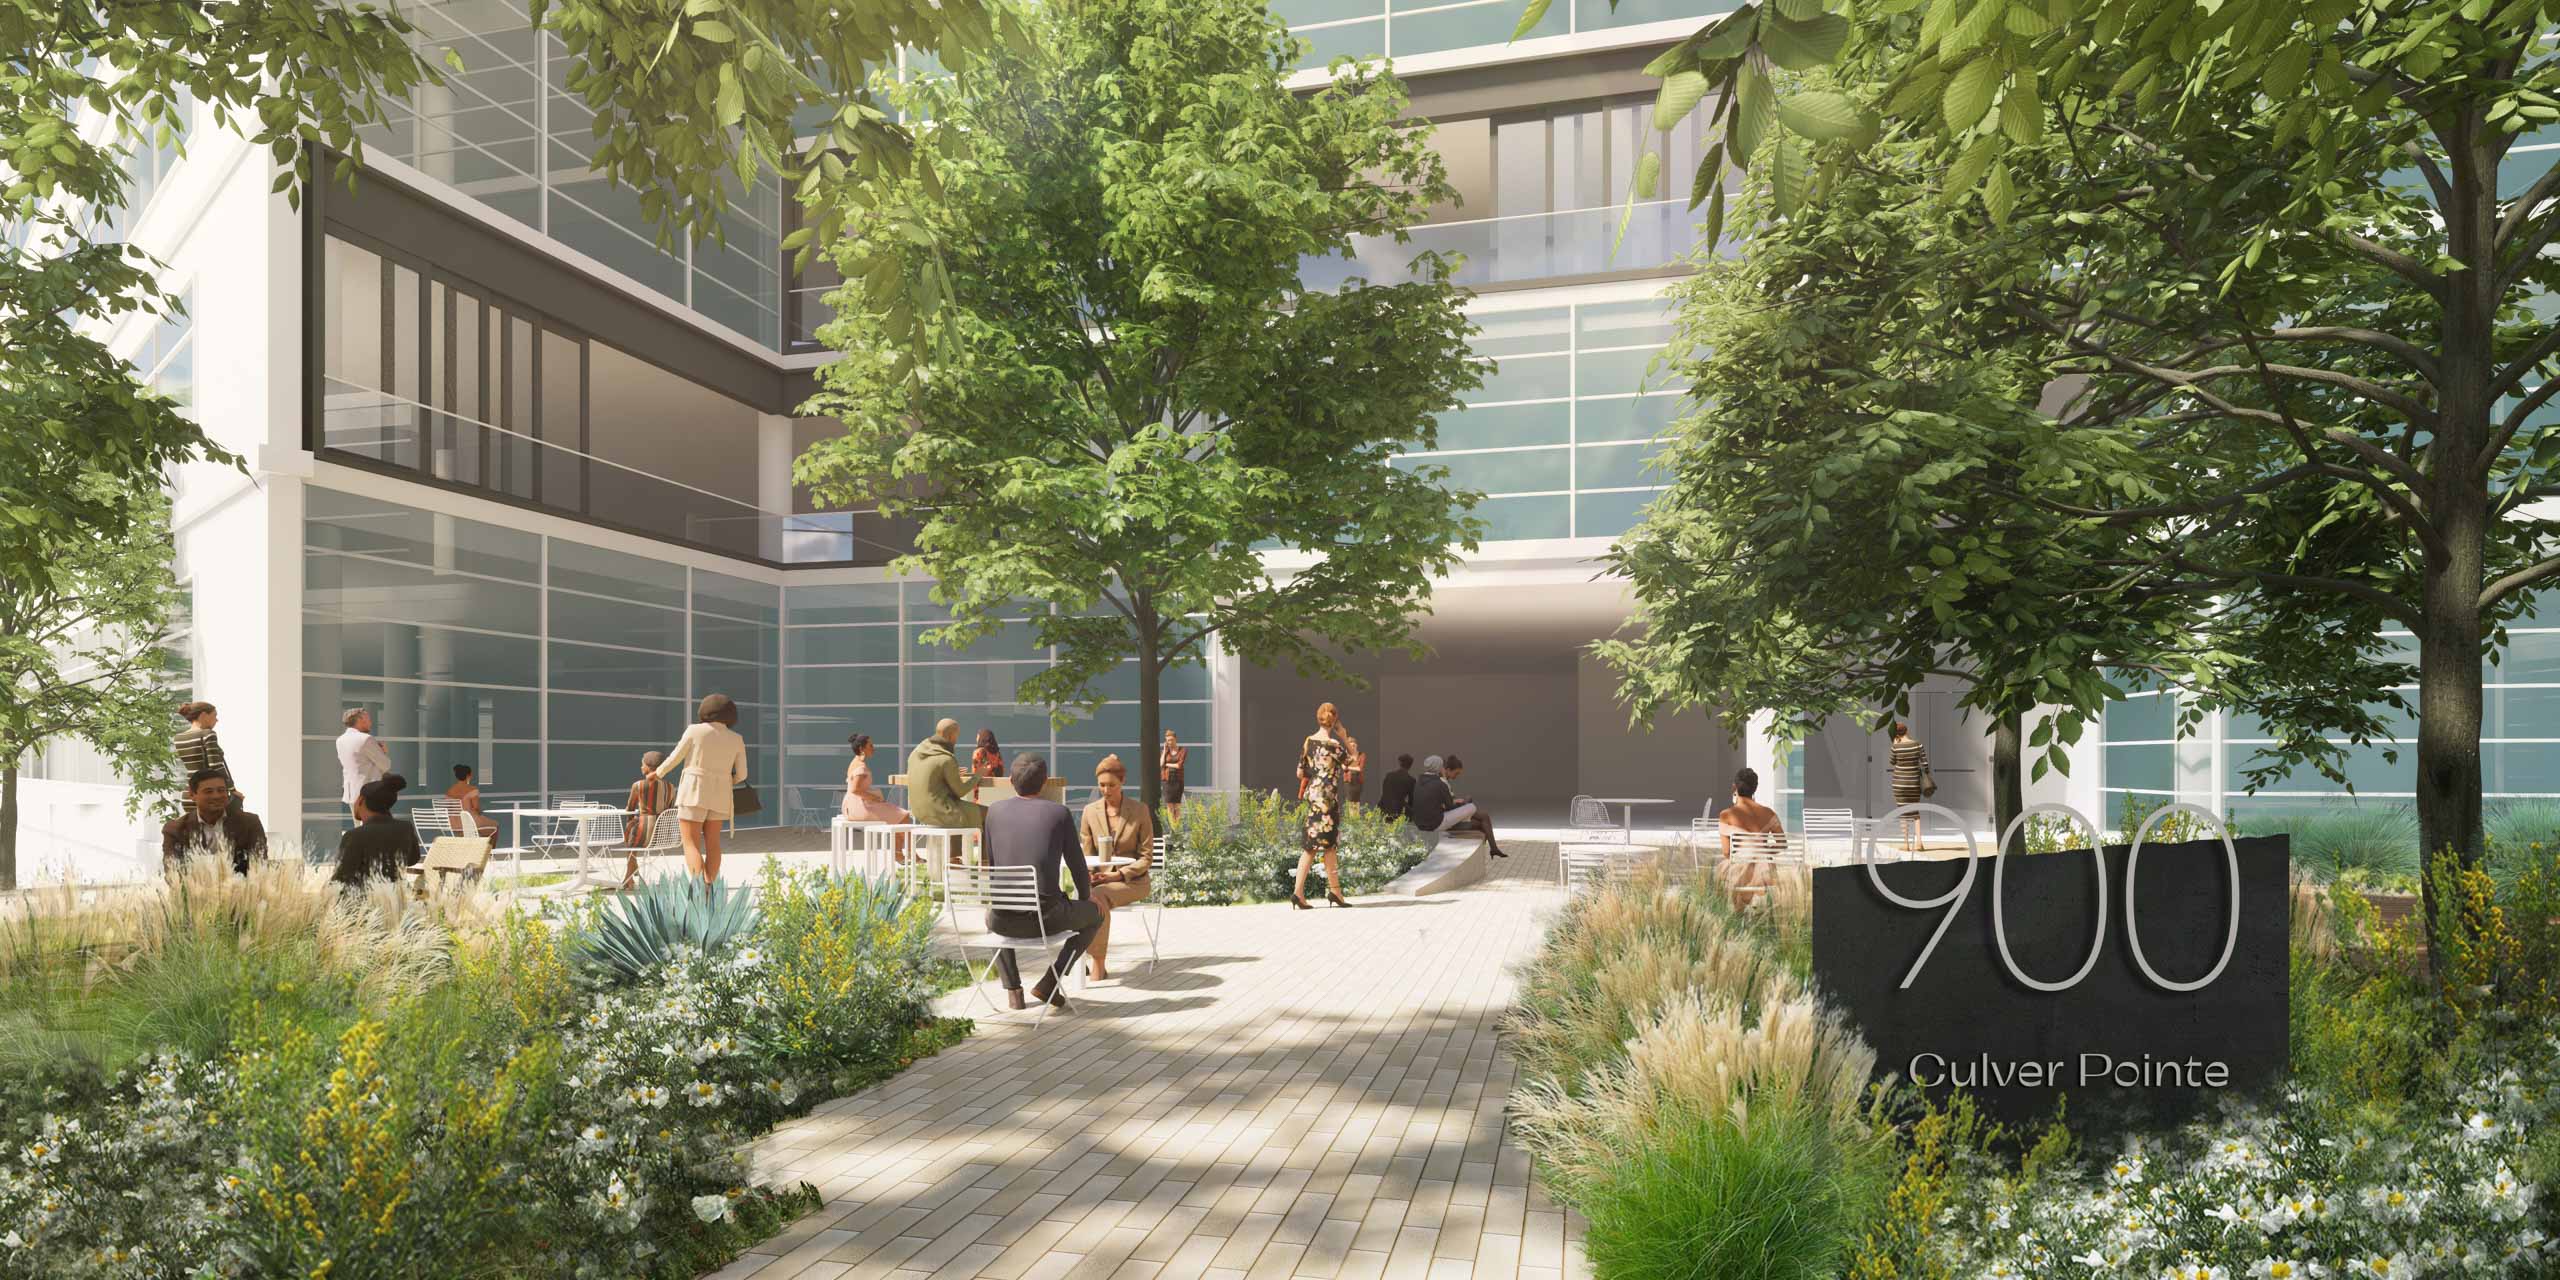 Rendering of lush courtyard with plantings, green trees, and 900 Culver Pointe signage